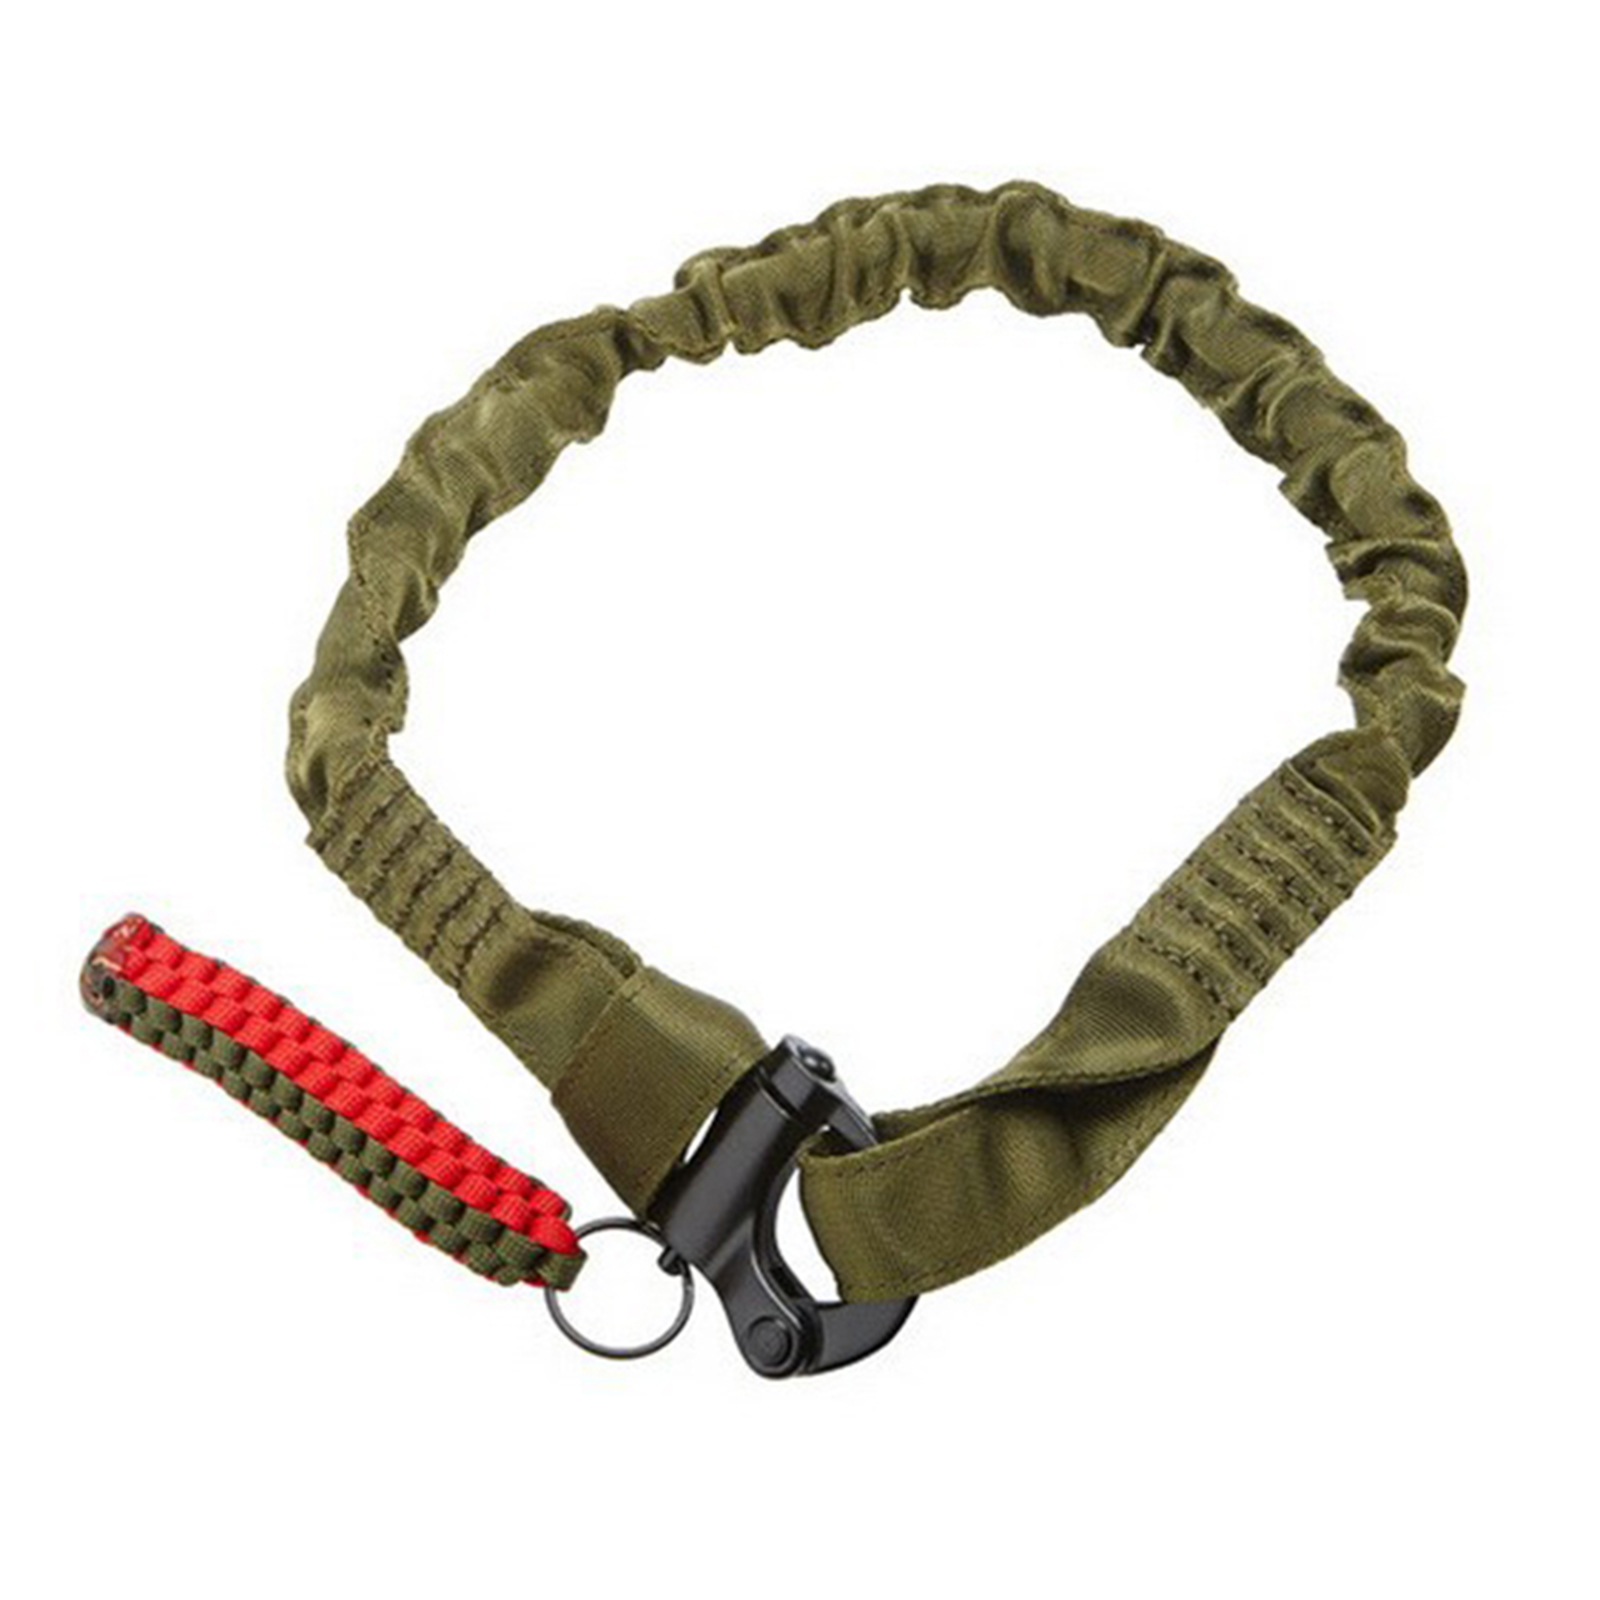 Outdoor Safety Rope Multifunctional Quick Release Survival Kit For Outdoor Sports Aerial Work Hiking